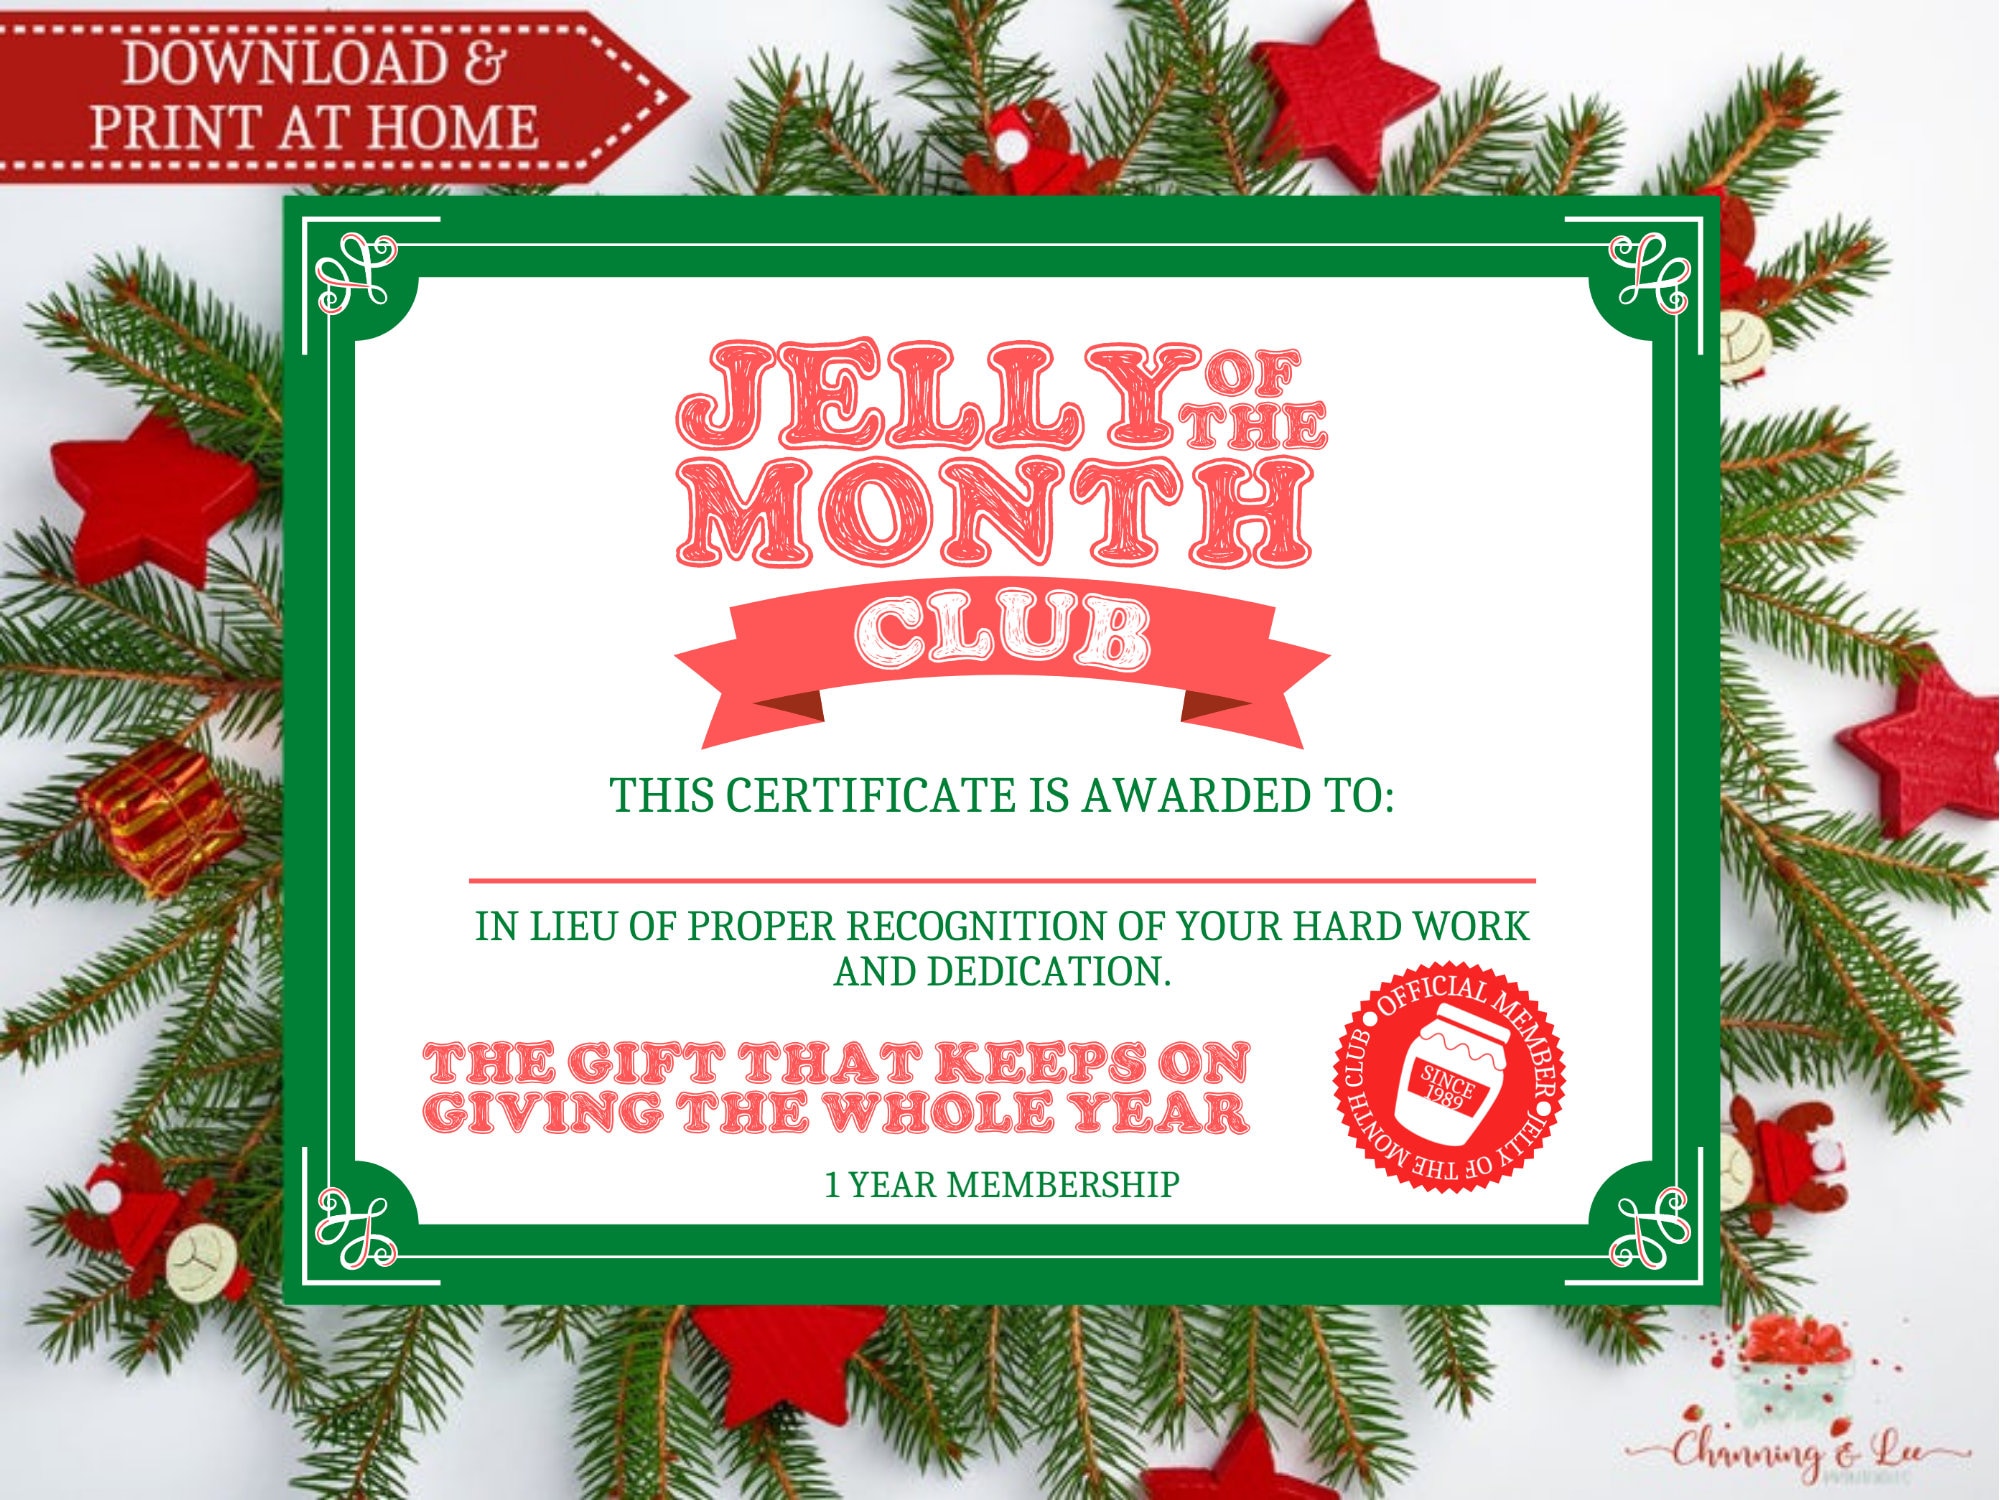 jelly-of-the-month-club-certificate-free-printable